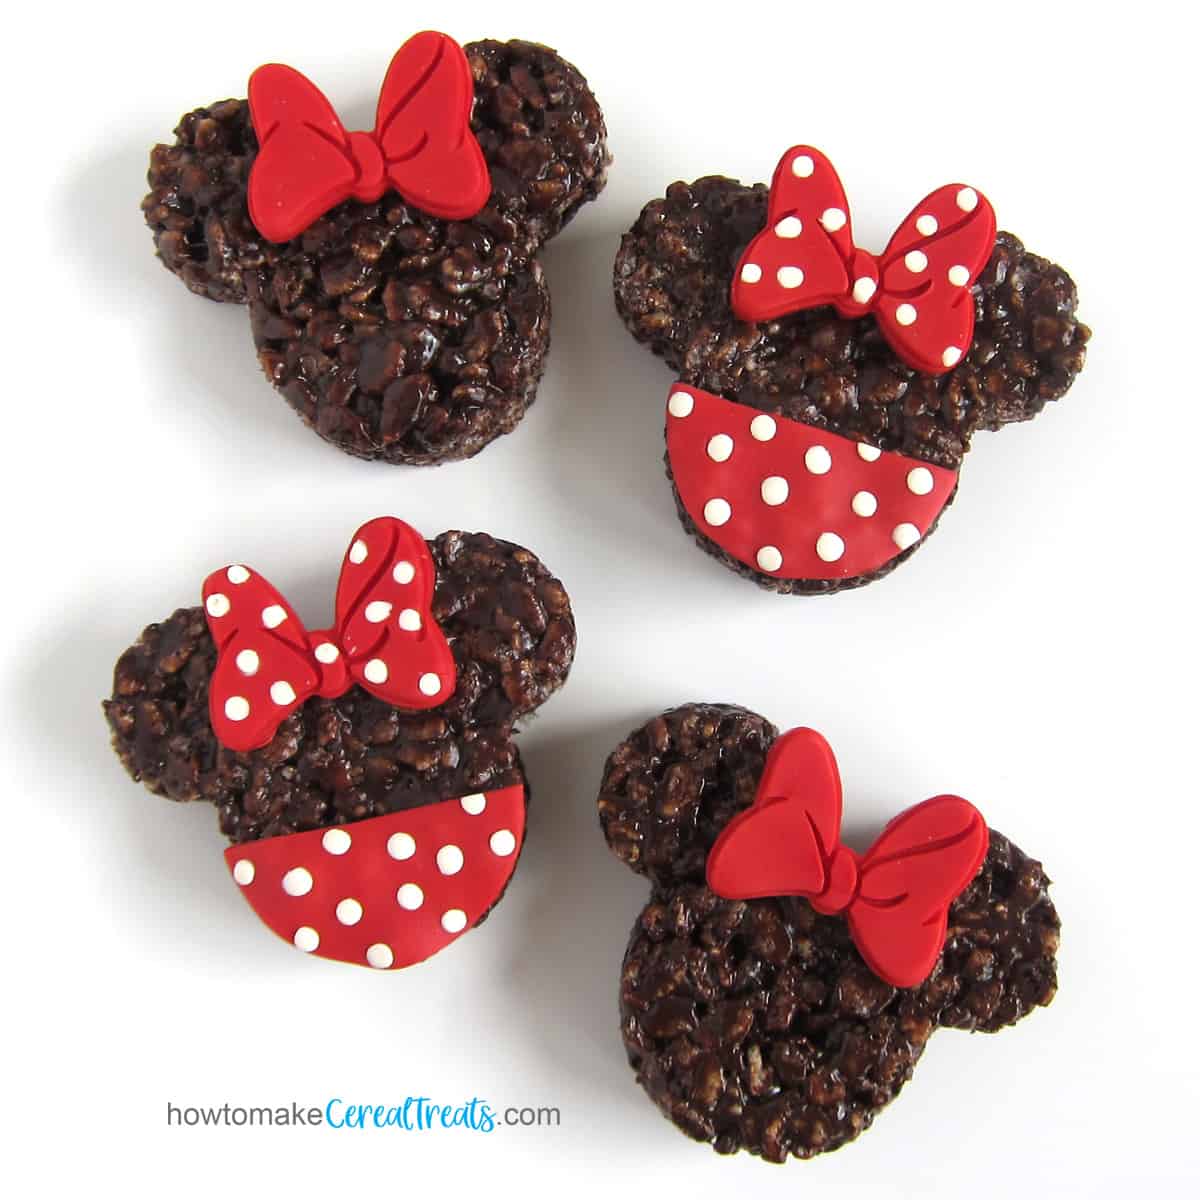 Minnie Mouse Rice Krispie Treats with red bows and red and white polka dot bows and "dresses"